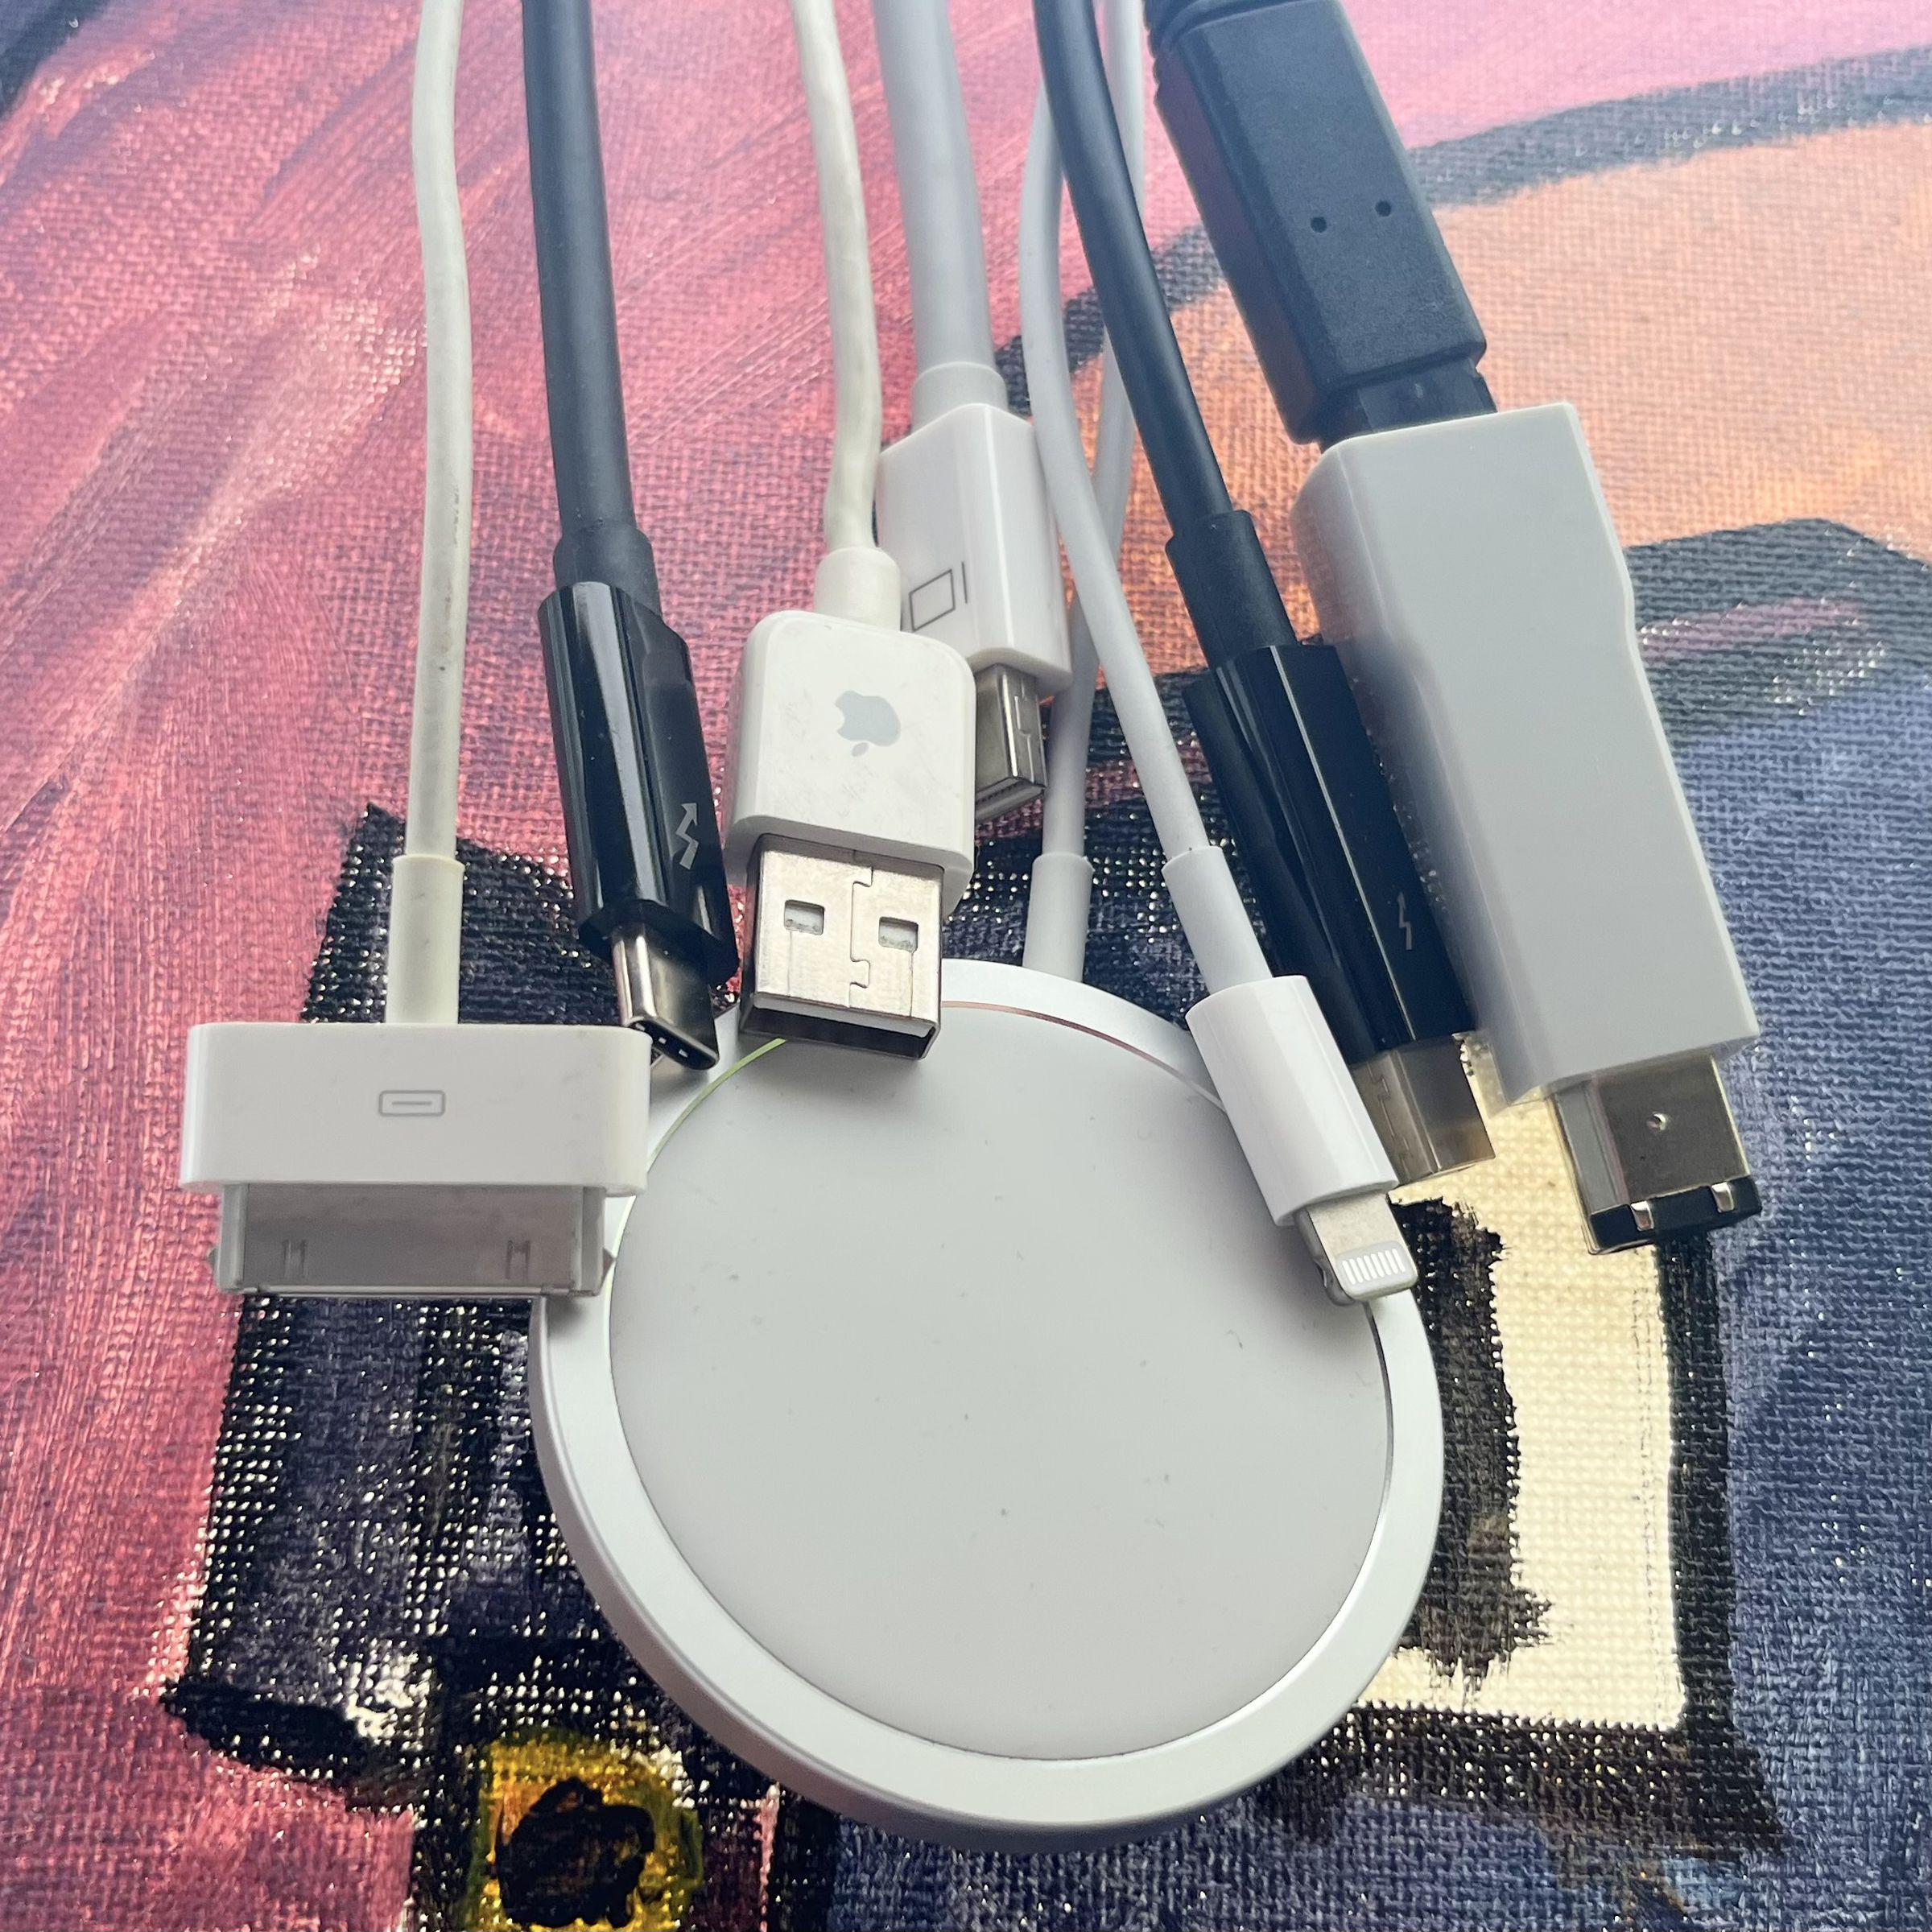 30-pin, usb-c thunderbolt 3, usb a with apple logo, magsafe for iphone, mini DisplayPort, lightning, thunderbolt 2, firewire 400 and 800 cables all dangling in front of a purple hue painting